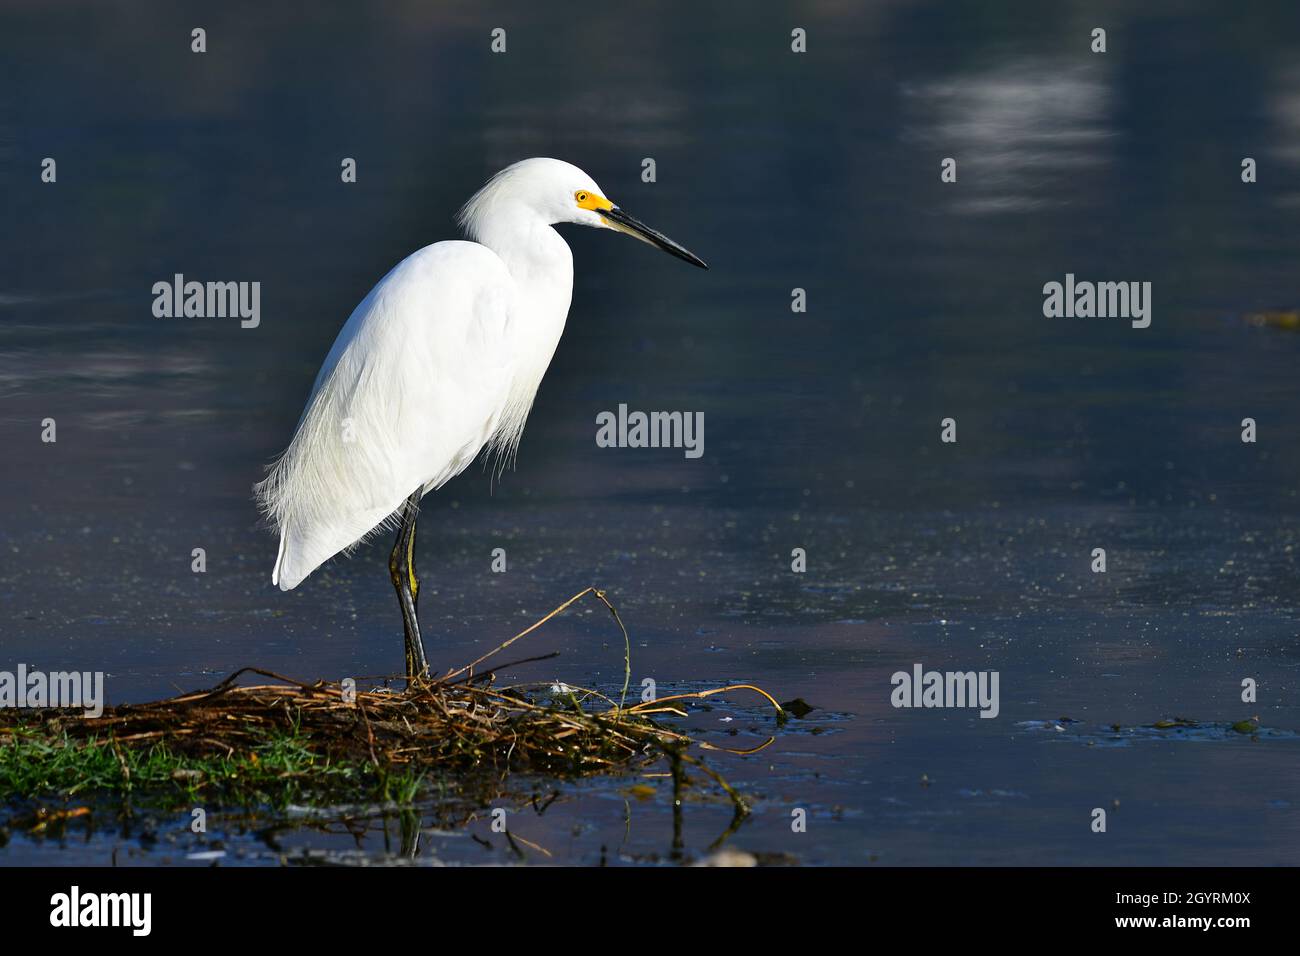 Snowy Egret and water Stock Photo